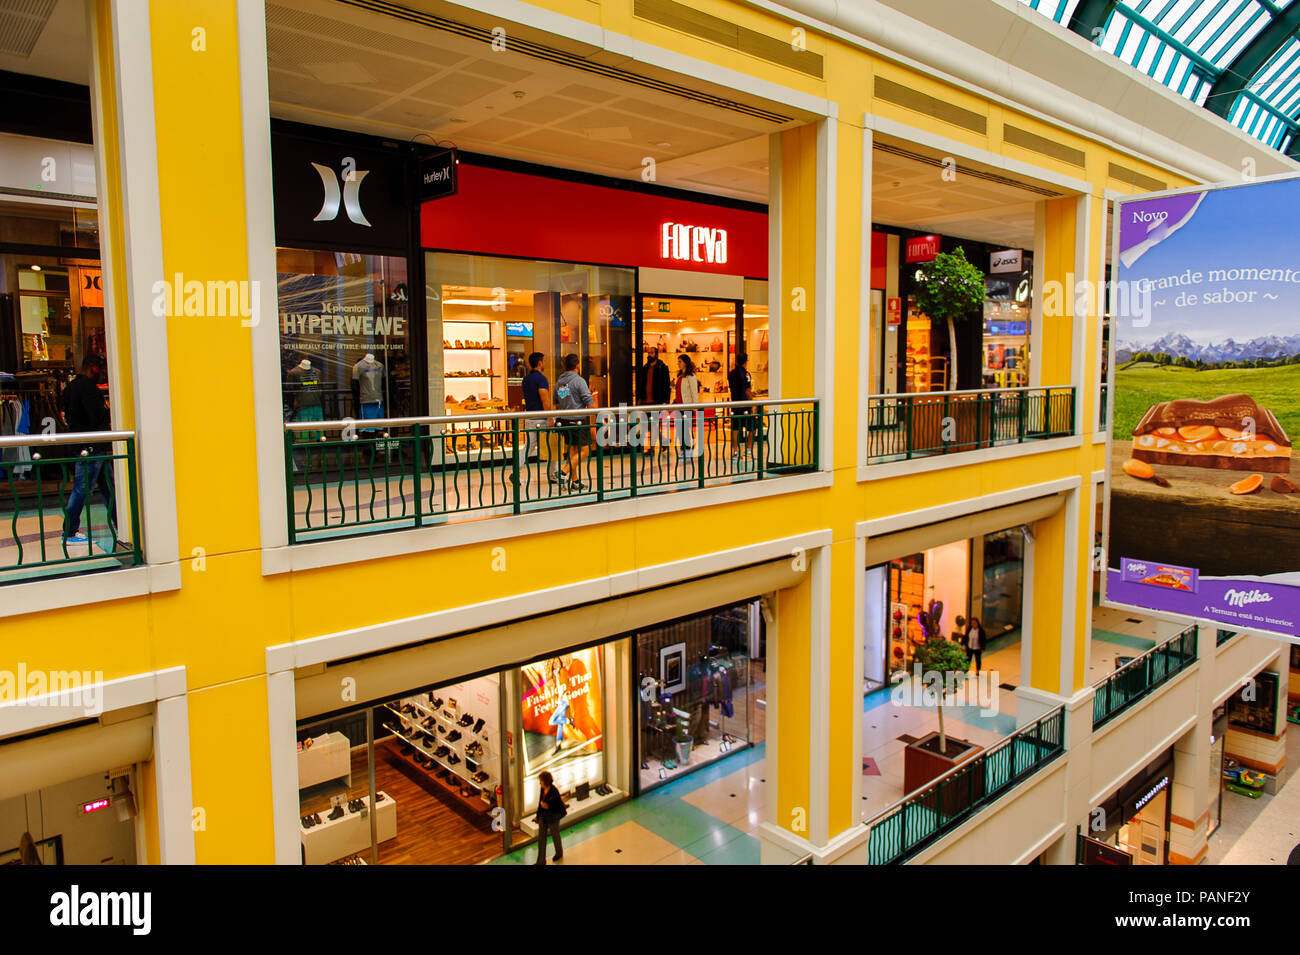 LISBON, PORTUGAL - OCT 17, 2016: Interior of the Centro Colombo, a famous  shopping centre in Lisbon. It opened on 15 September 1997 Stock Photo -  Alamy